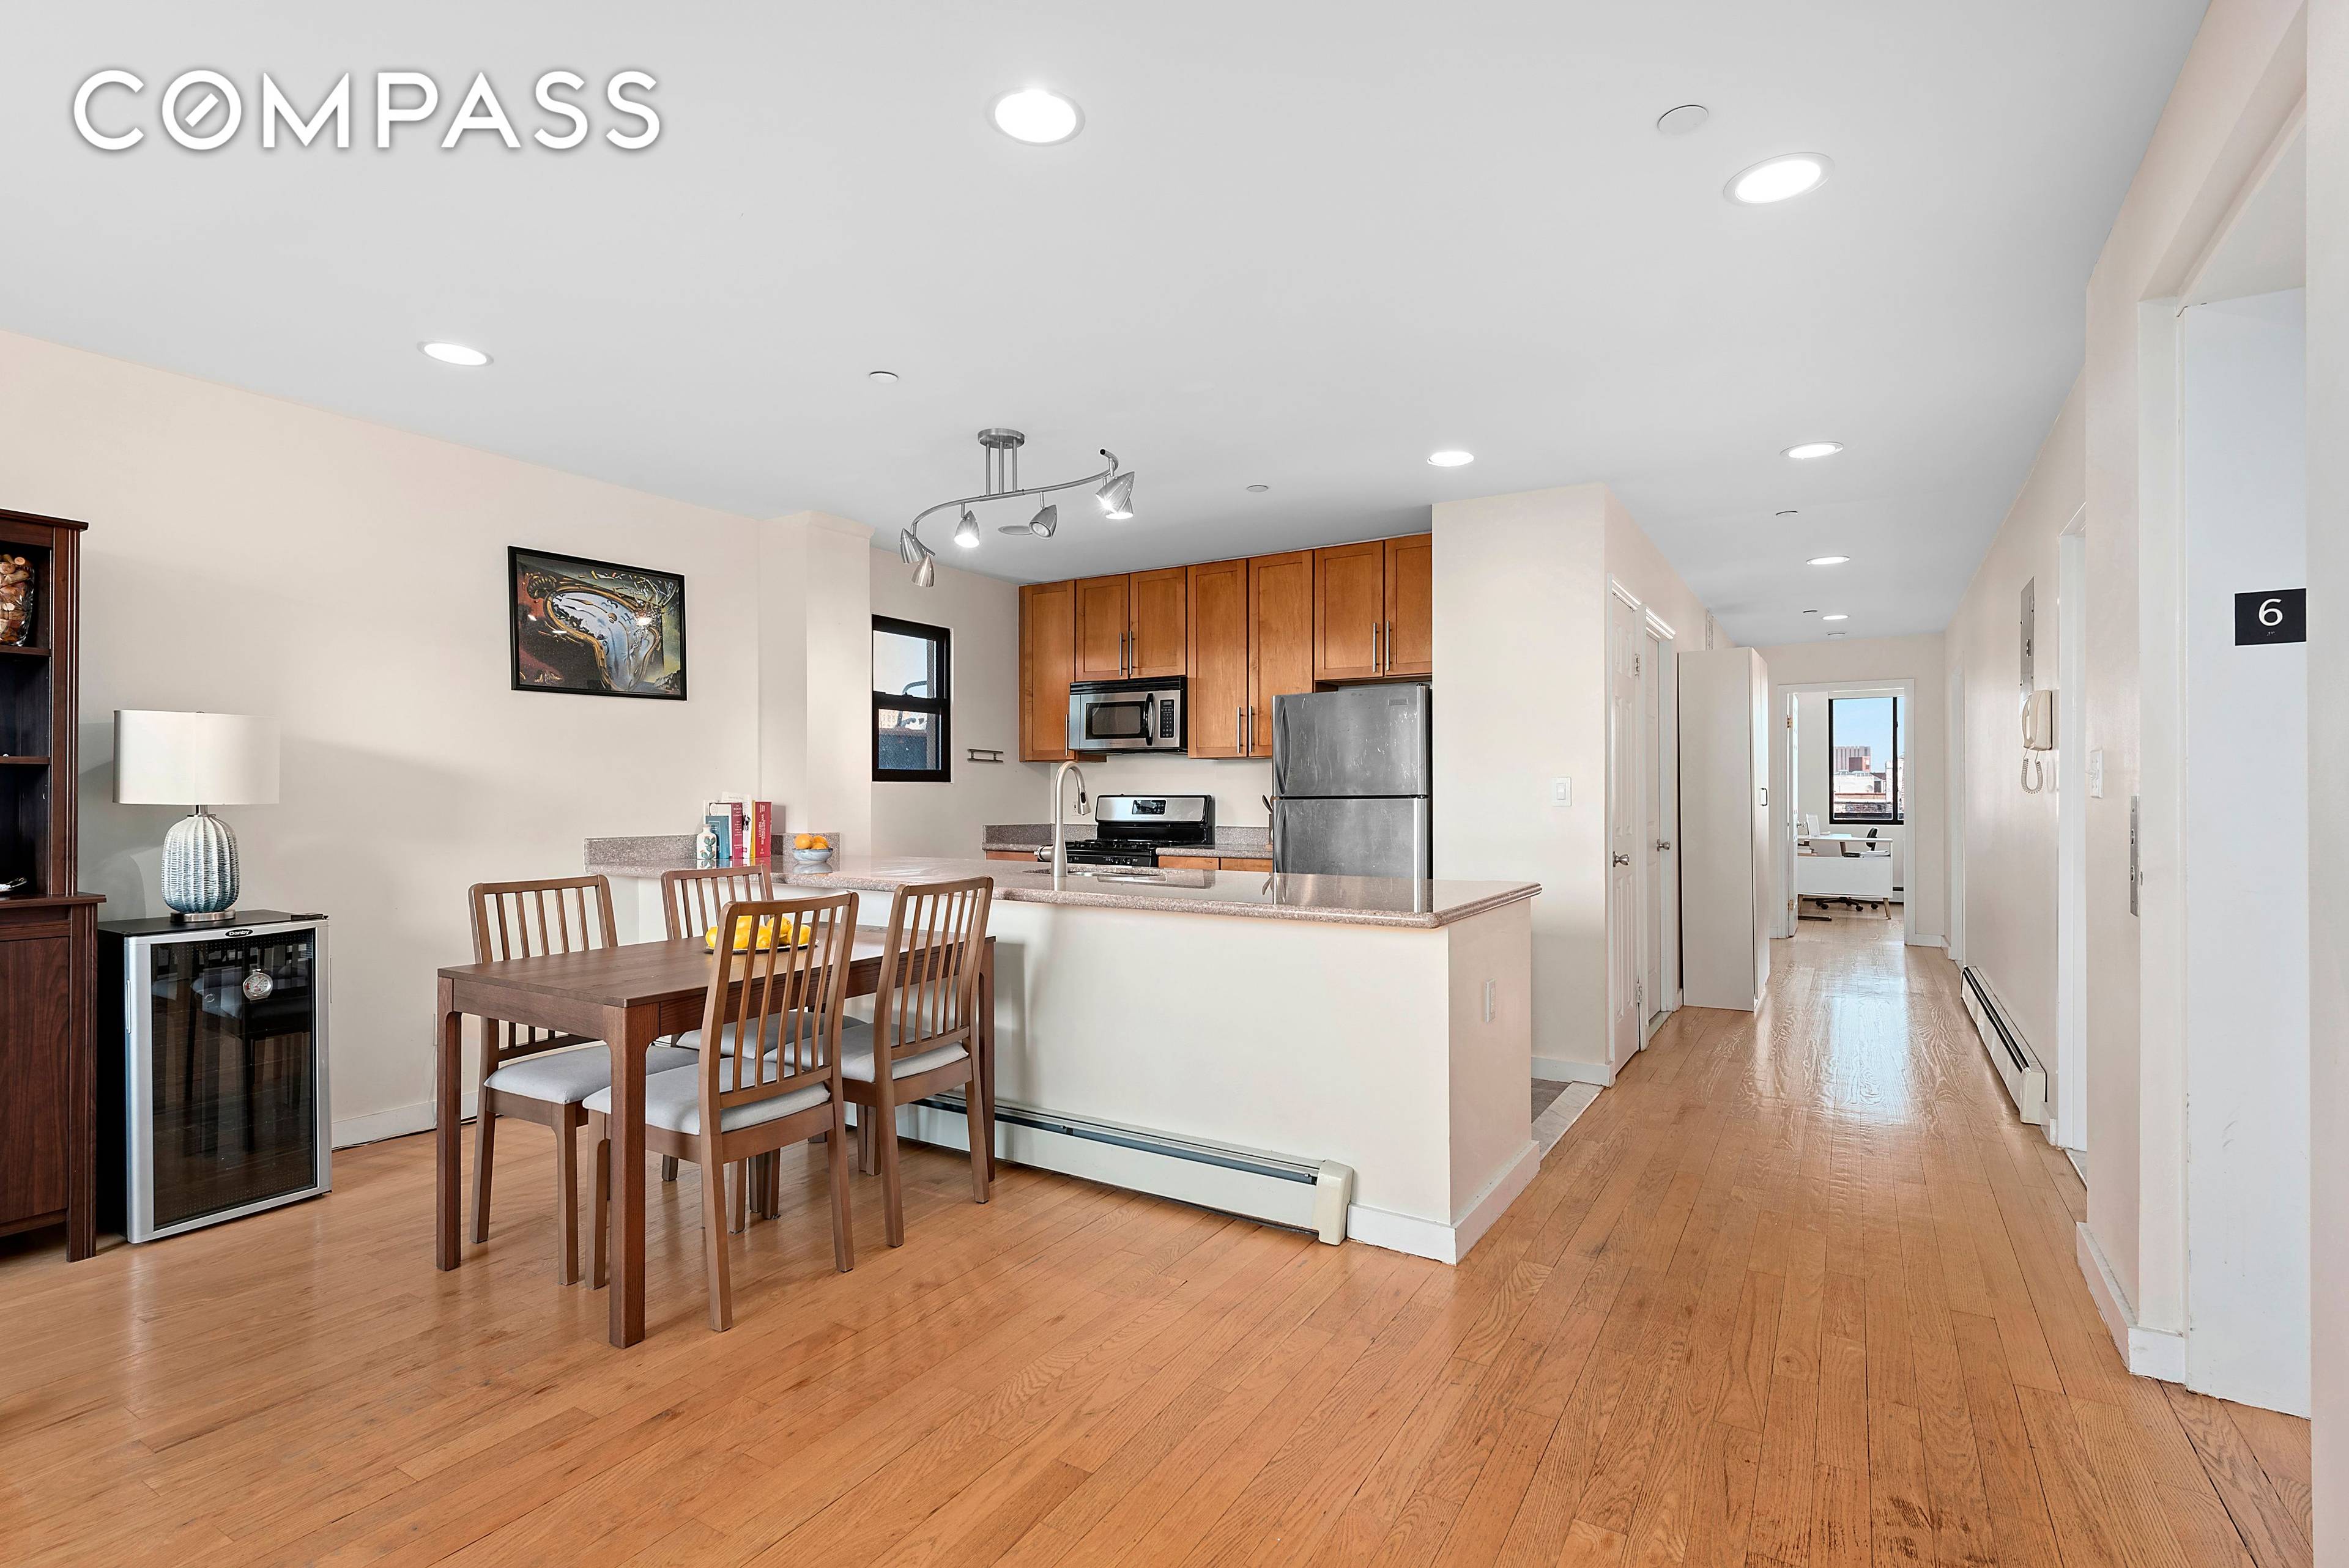 NO FEE rental in a luxury boutique condo ideally situated between the astute Columbia Presbyterian Hospital campus and the gorgeous Harlem River Park.